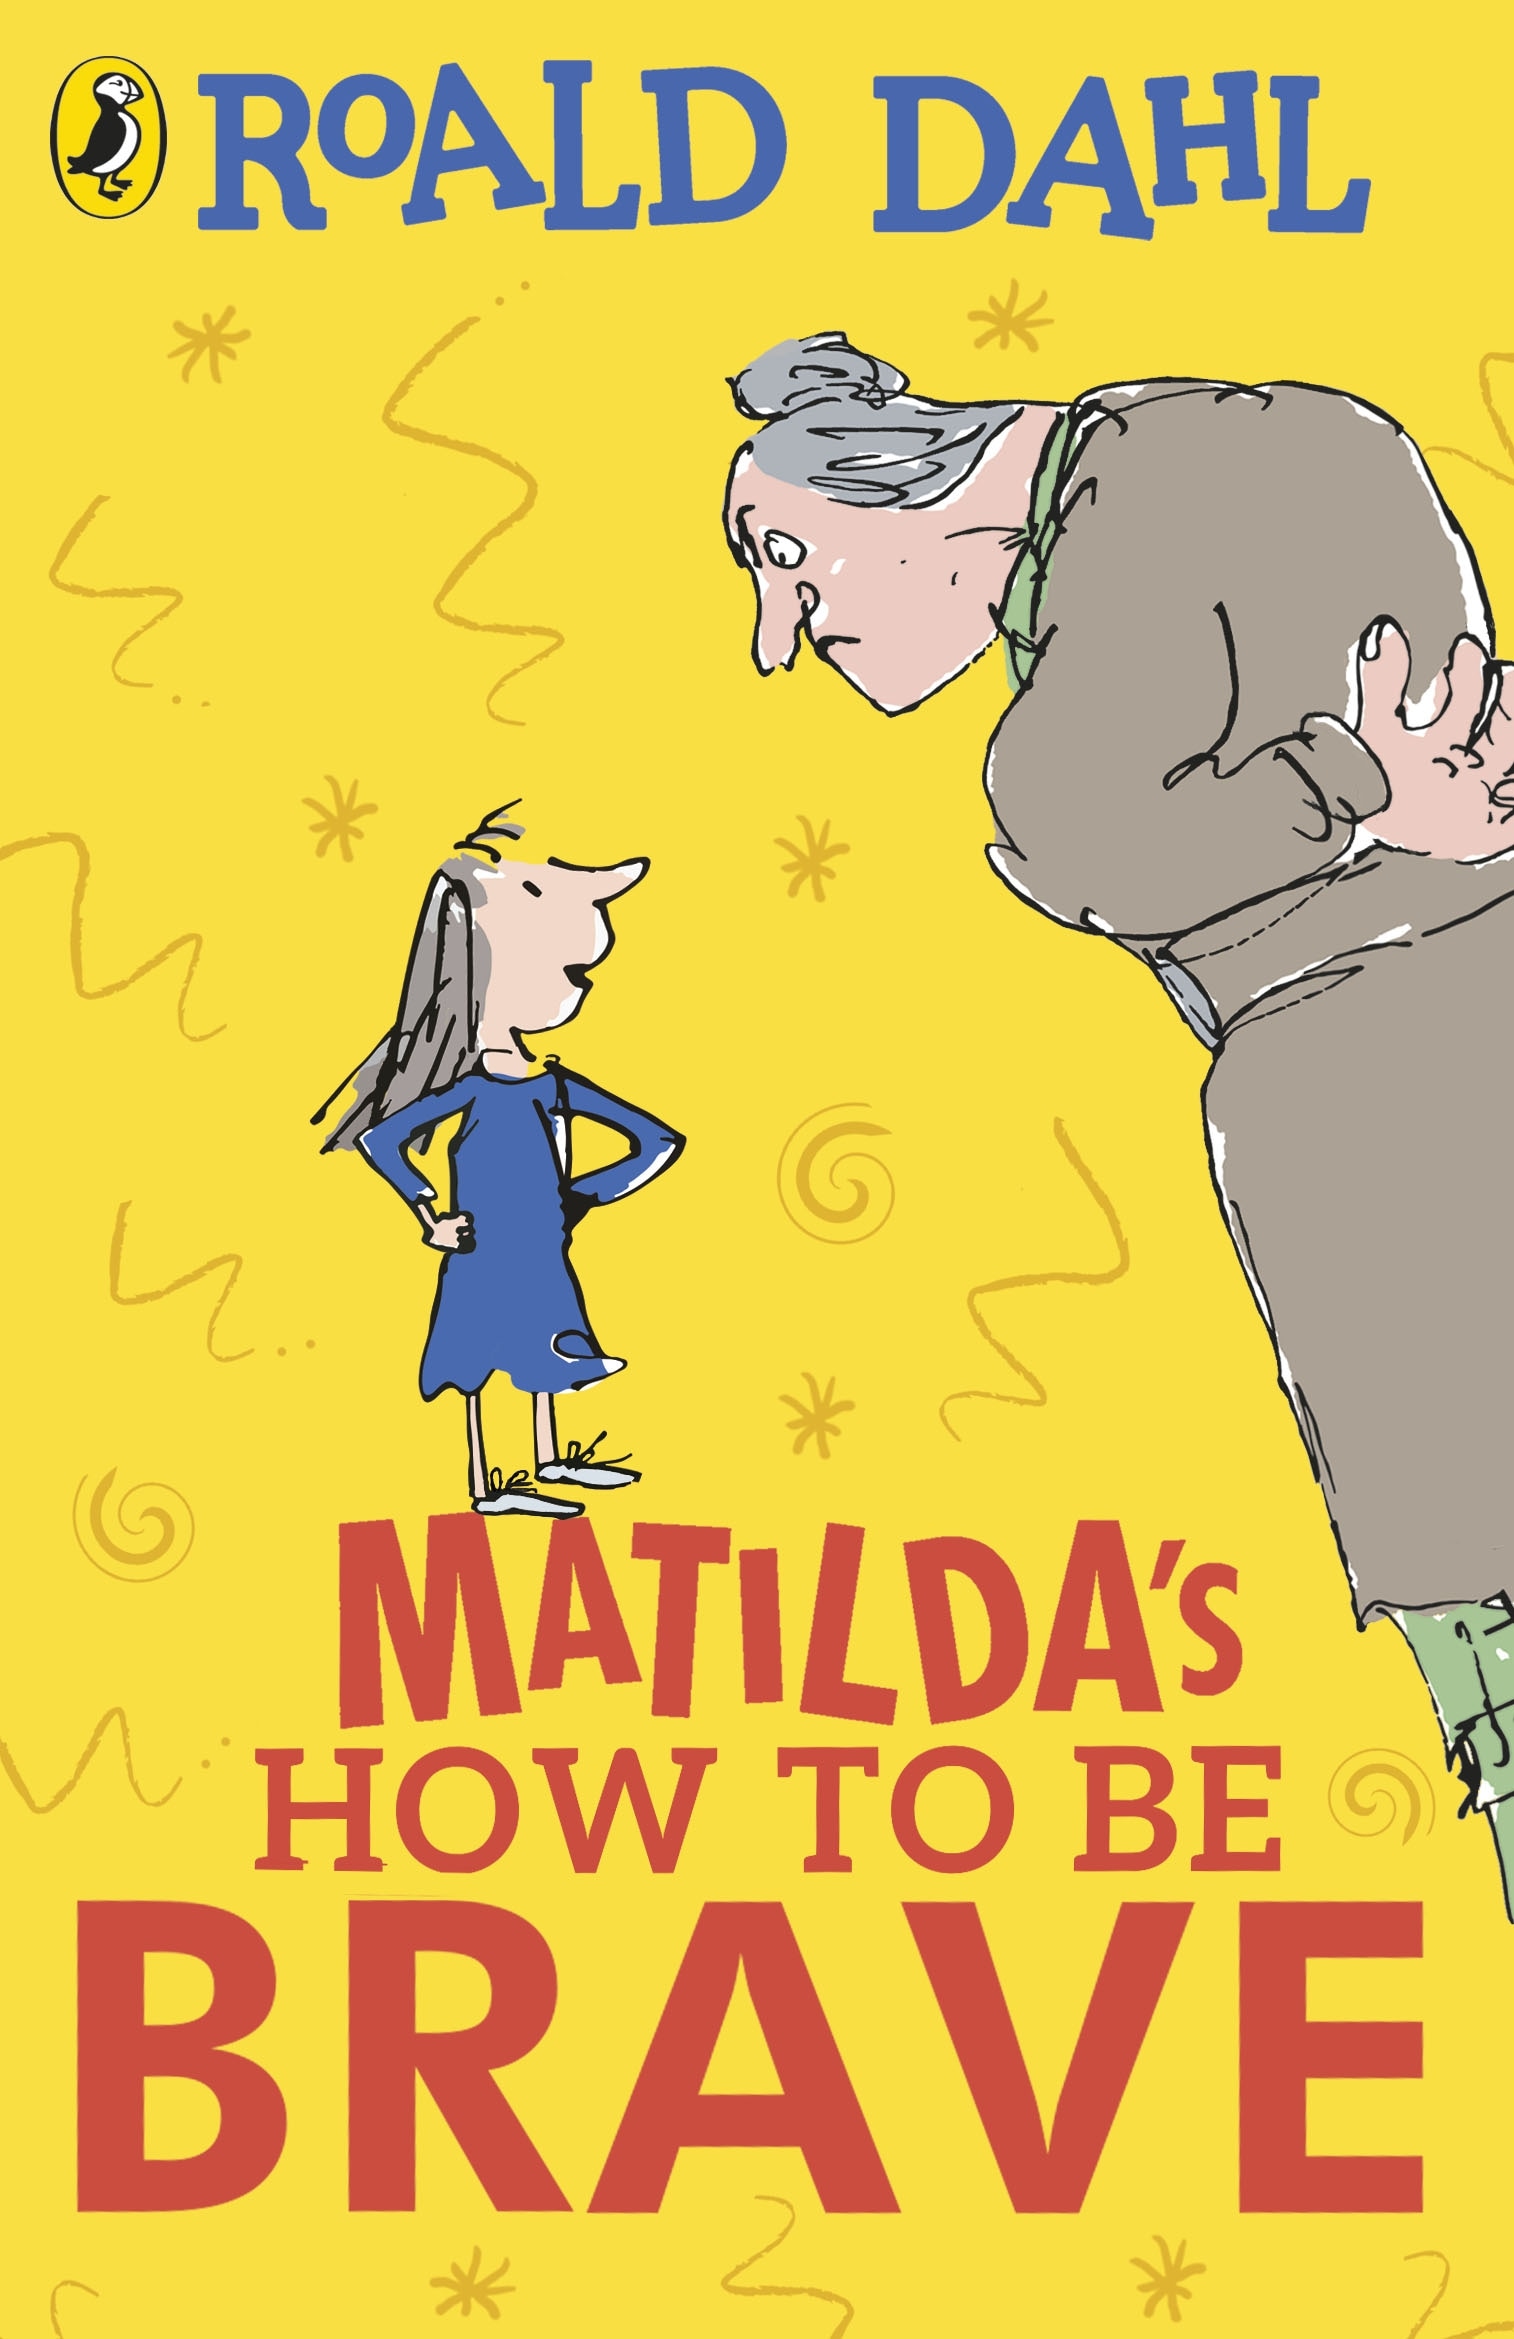 Book “Matilda's How To Be Brave” by Roald Dahl, Quentin Blake — September 5, 2019